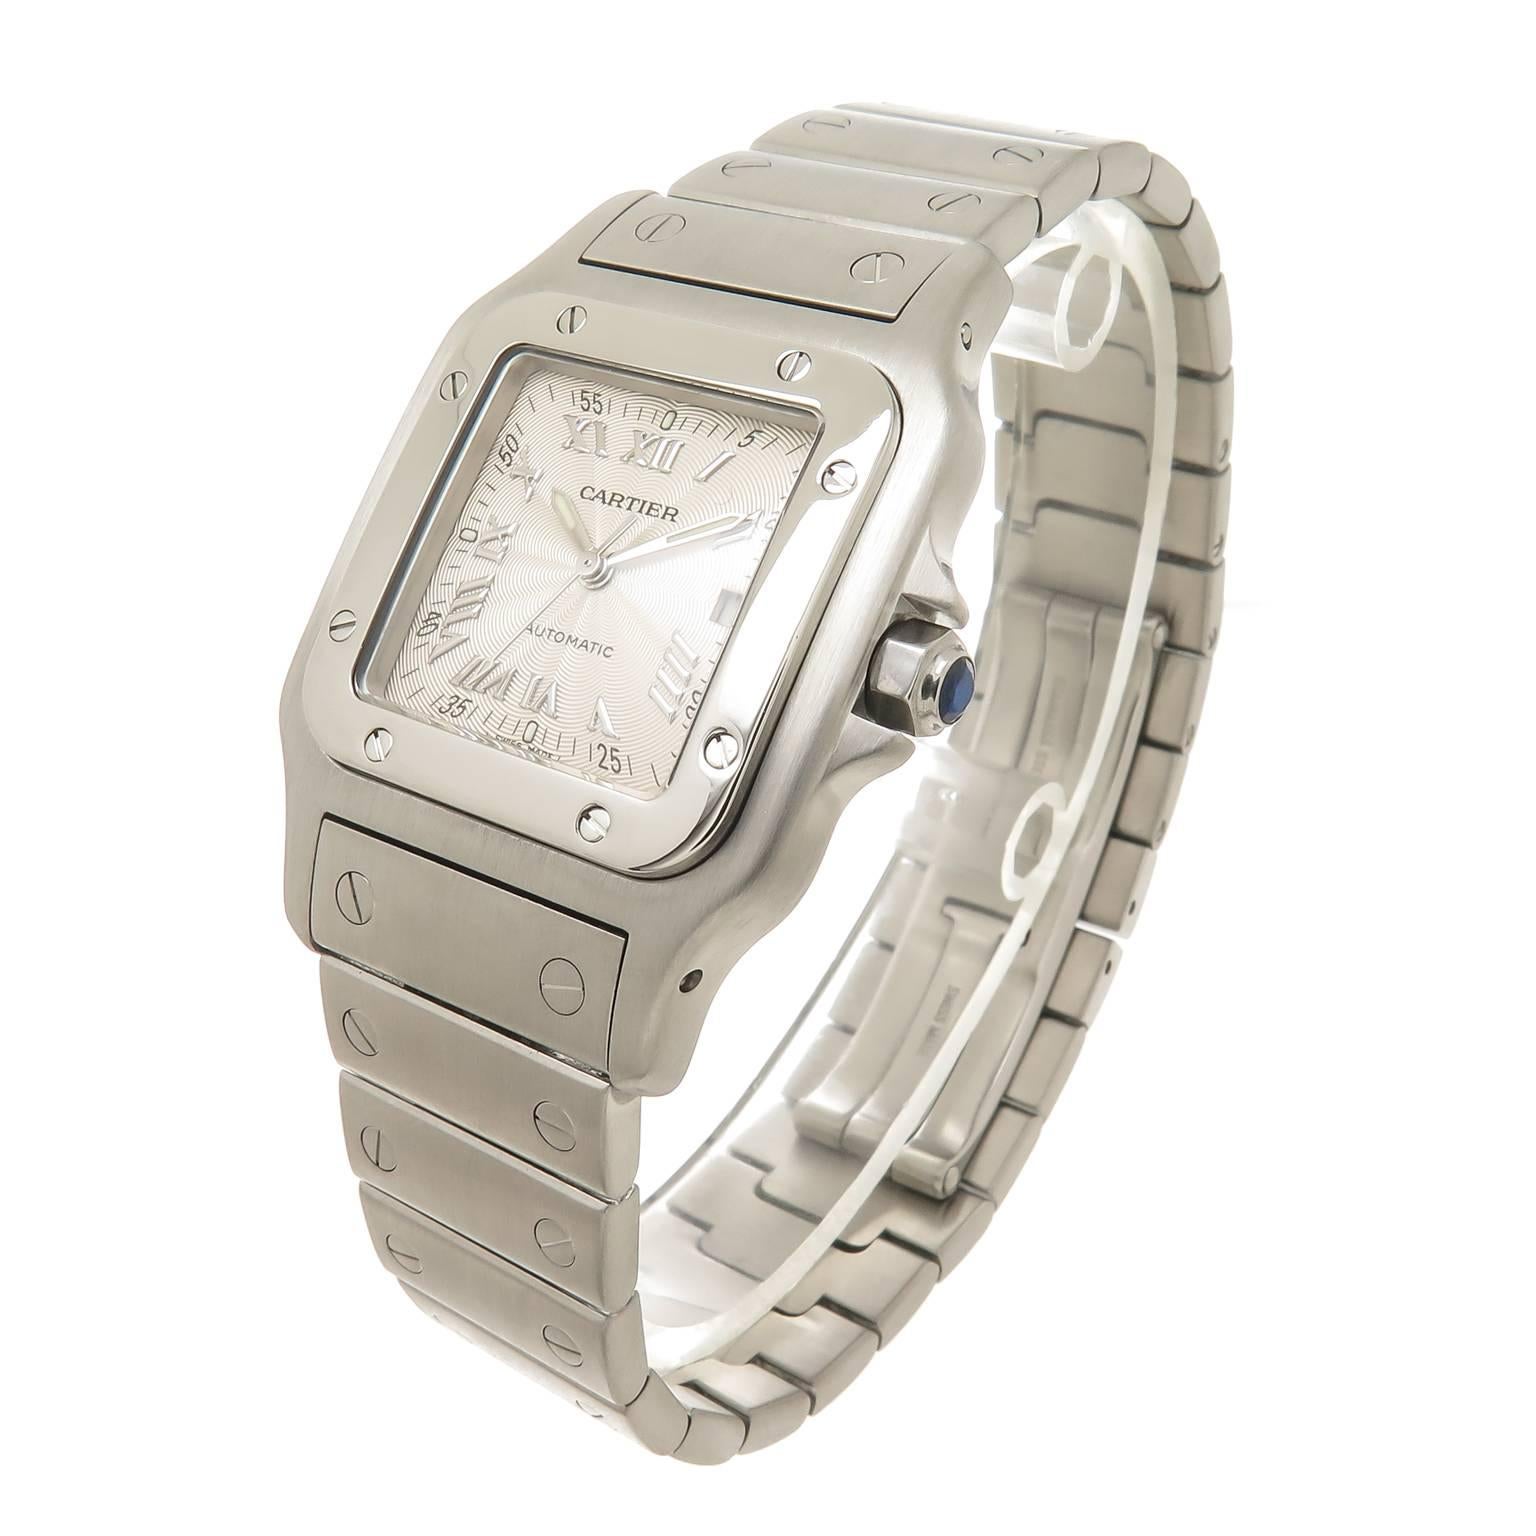 Circa 2005 Cartier Santos Galbee Wrist Watch, 41 X 29 MM Stainless Steel Water Resistant case. Automatic, self winding Movement, Silver Engine Turned Dial with Raised Silver Markers, sweep seconds hand, Calendar window at the 3 position, scratch